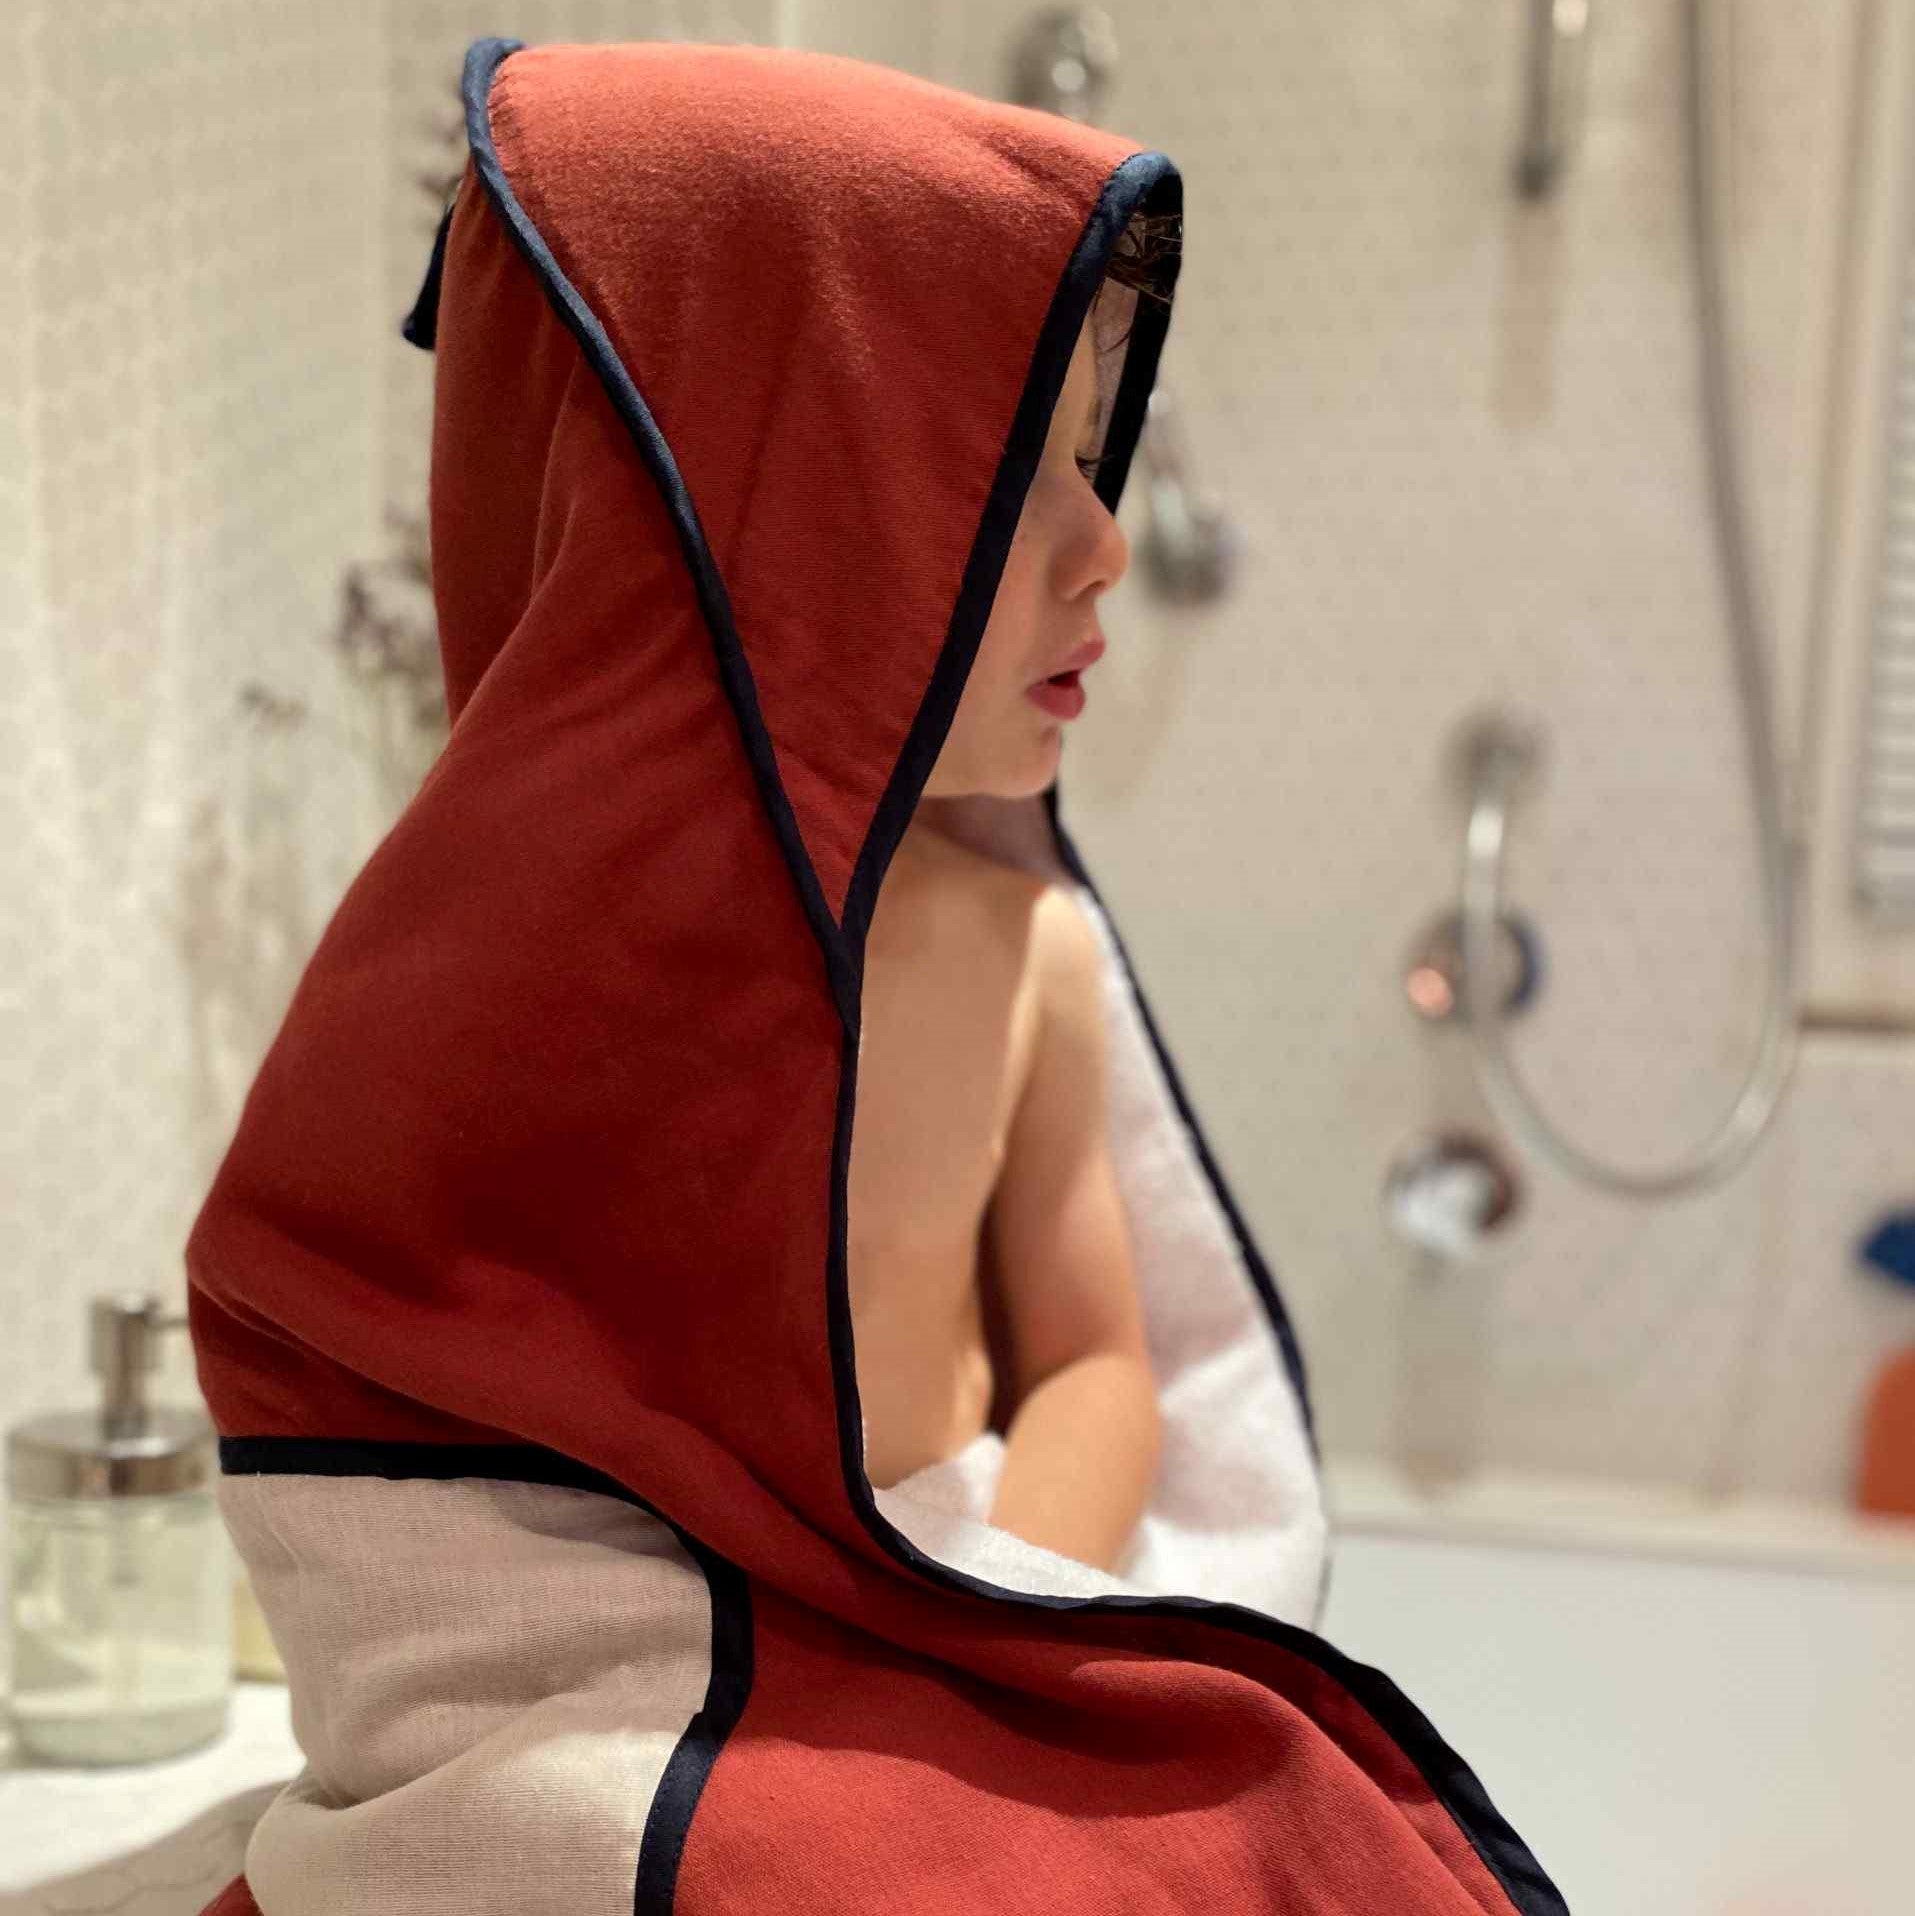 Bathing cape made in France and sustainable